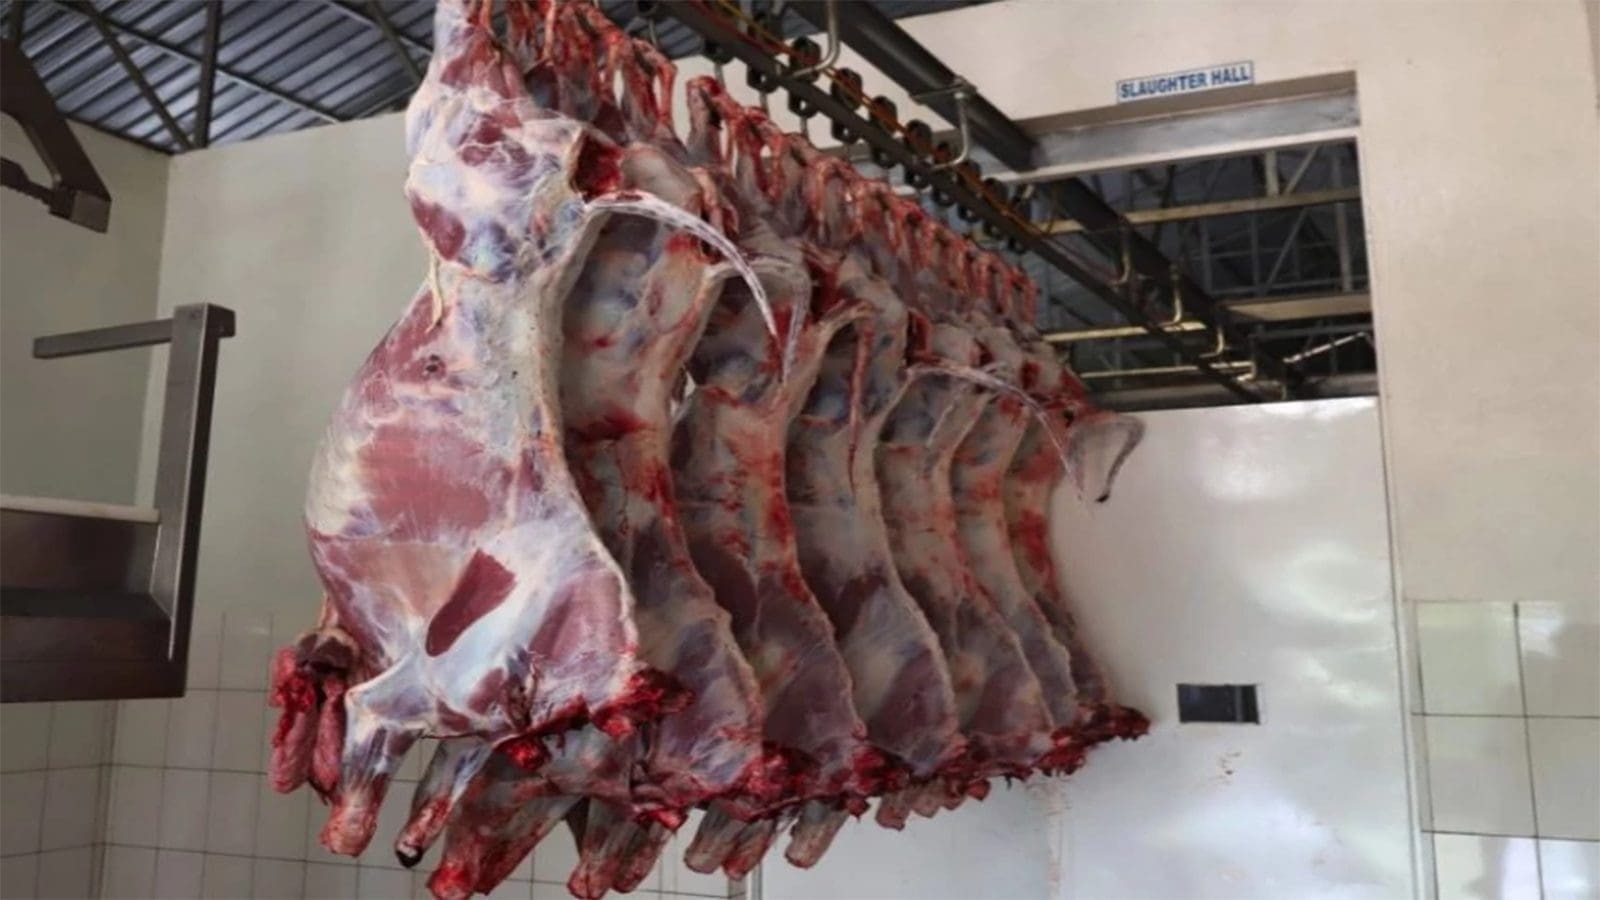 Rwanda moves to improve meat safety, bans sale of unrefrigerated meat